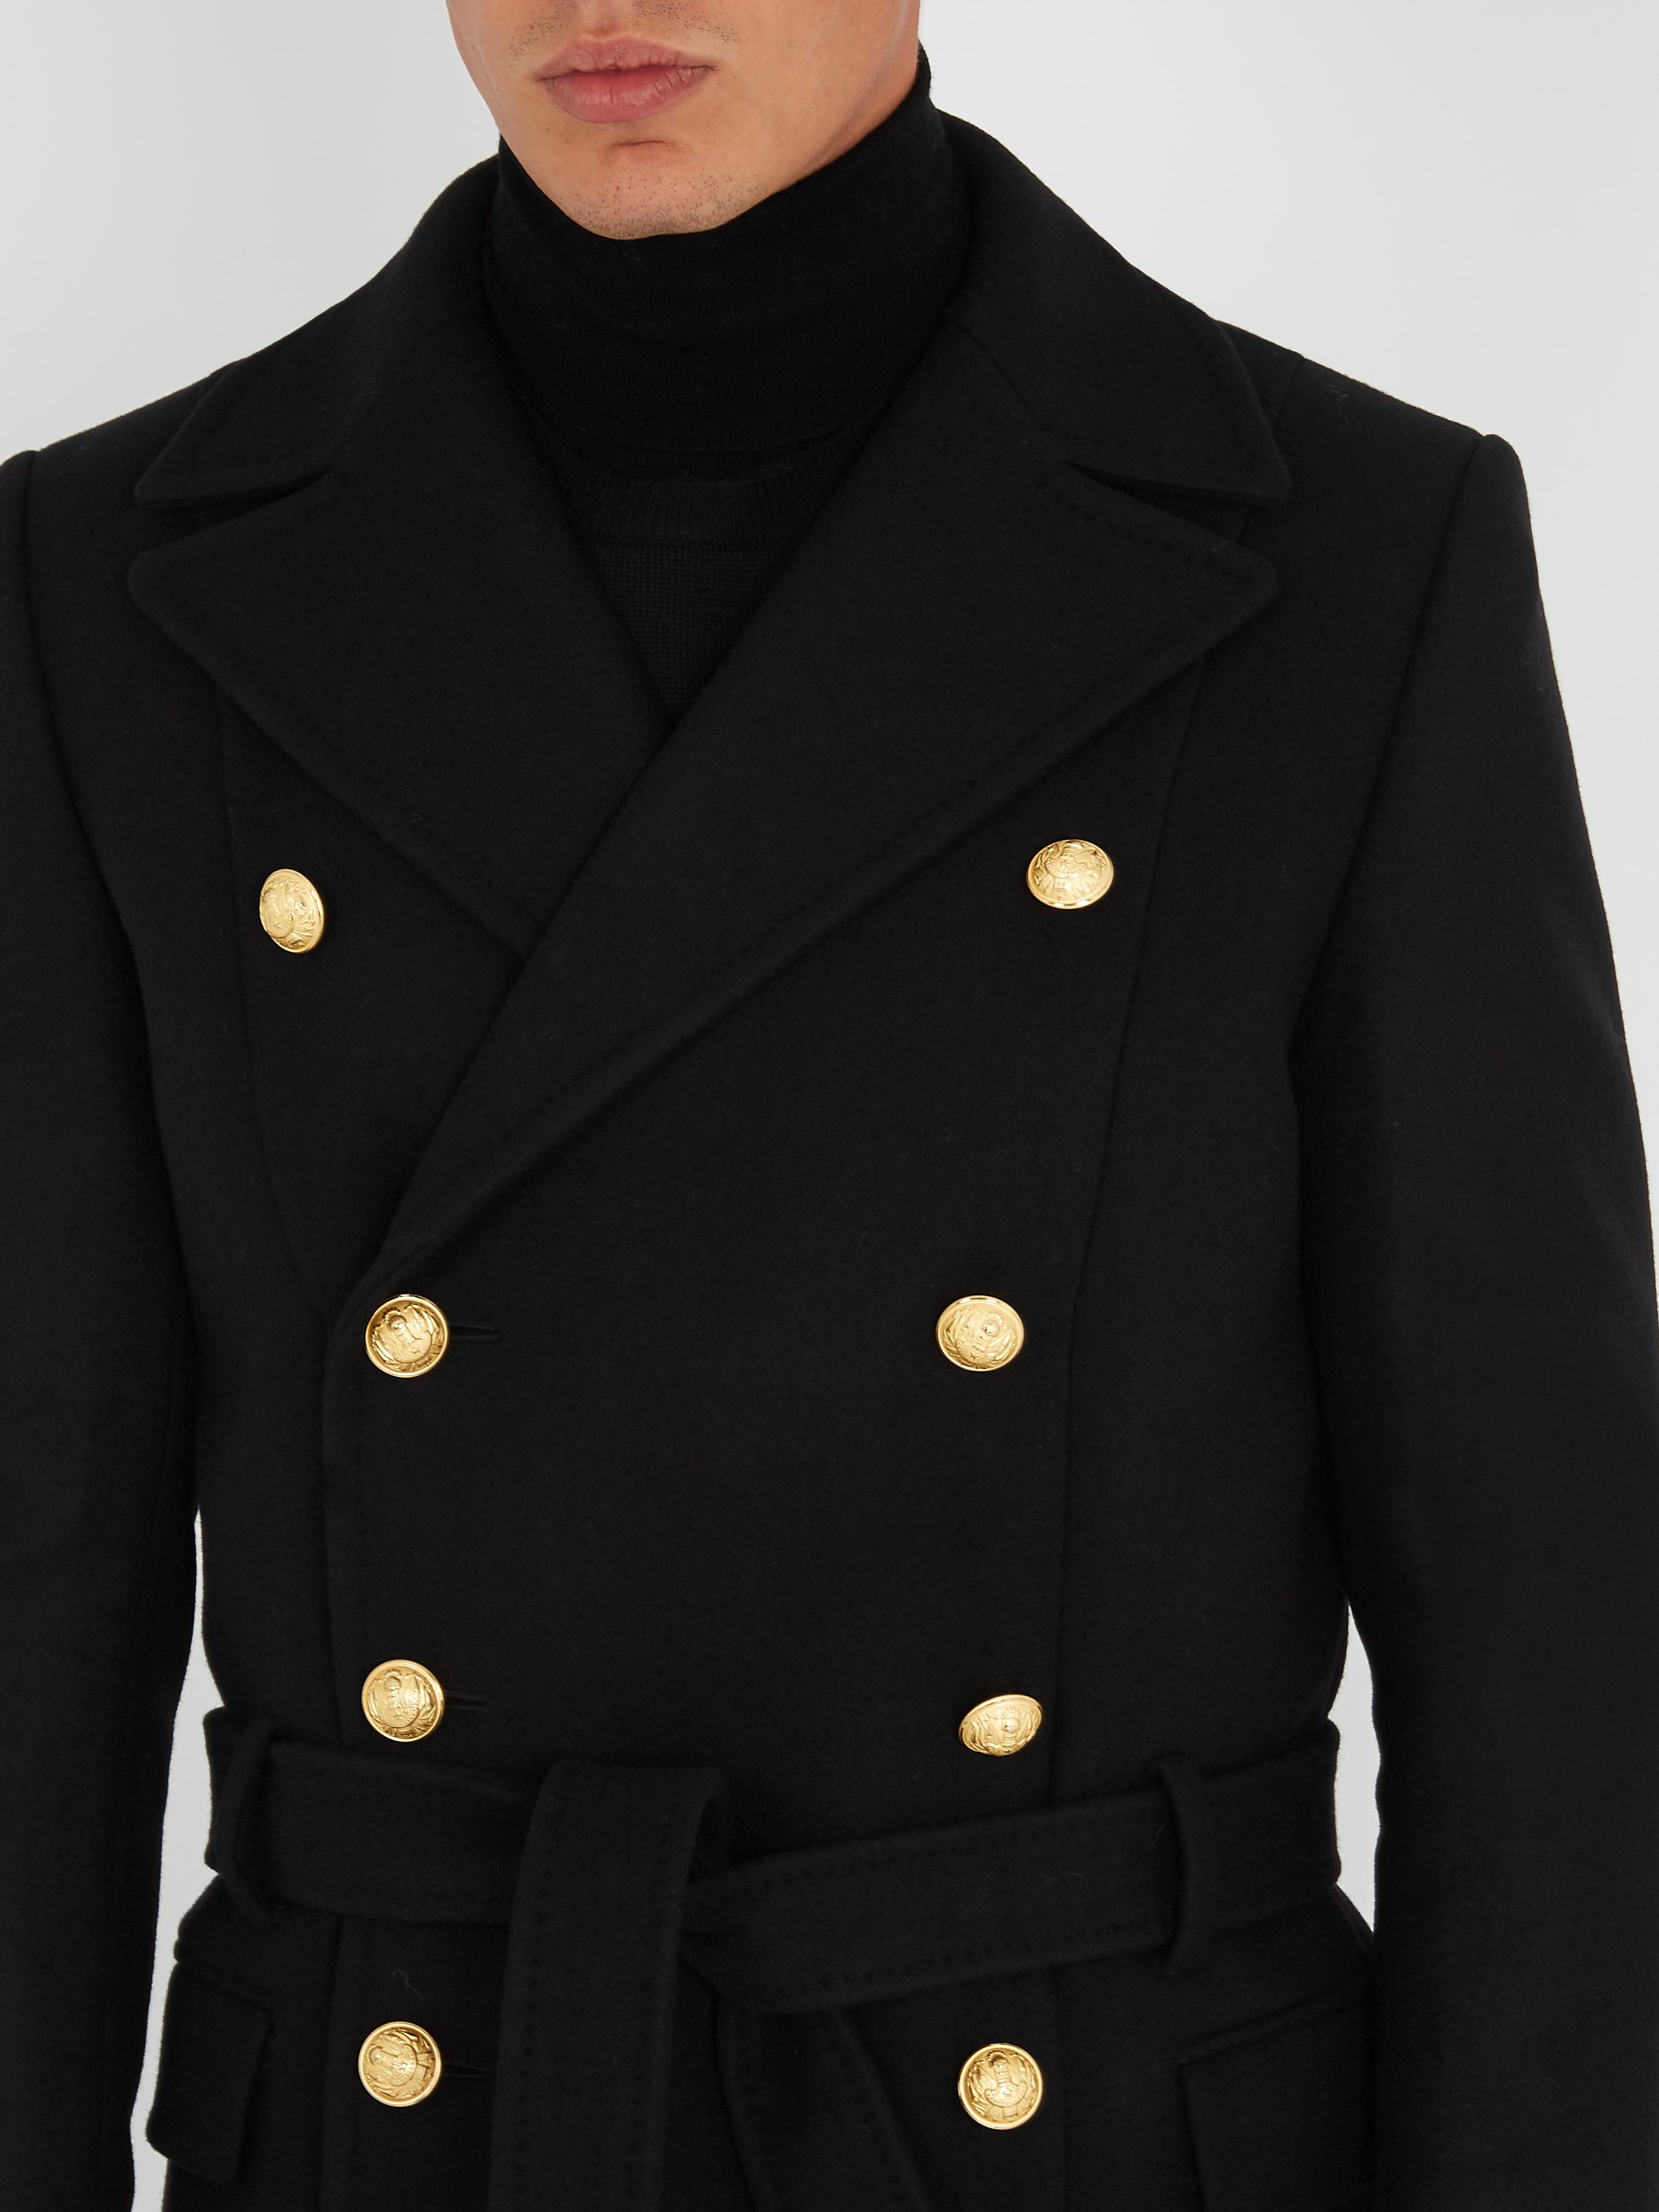 Balmain Double-breasted Wool-blend Military Coat in Black for Men - Lyst